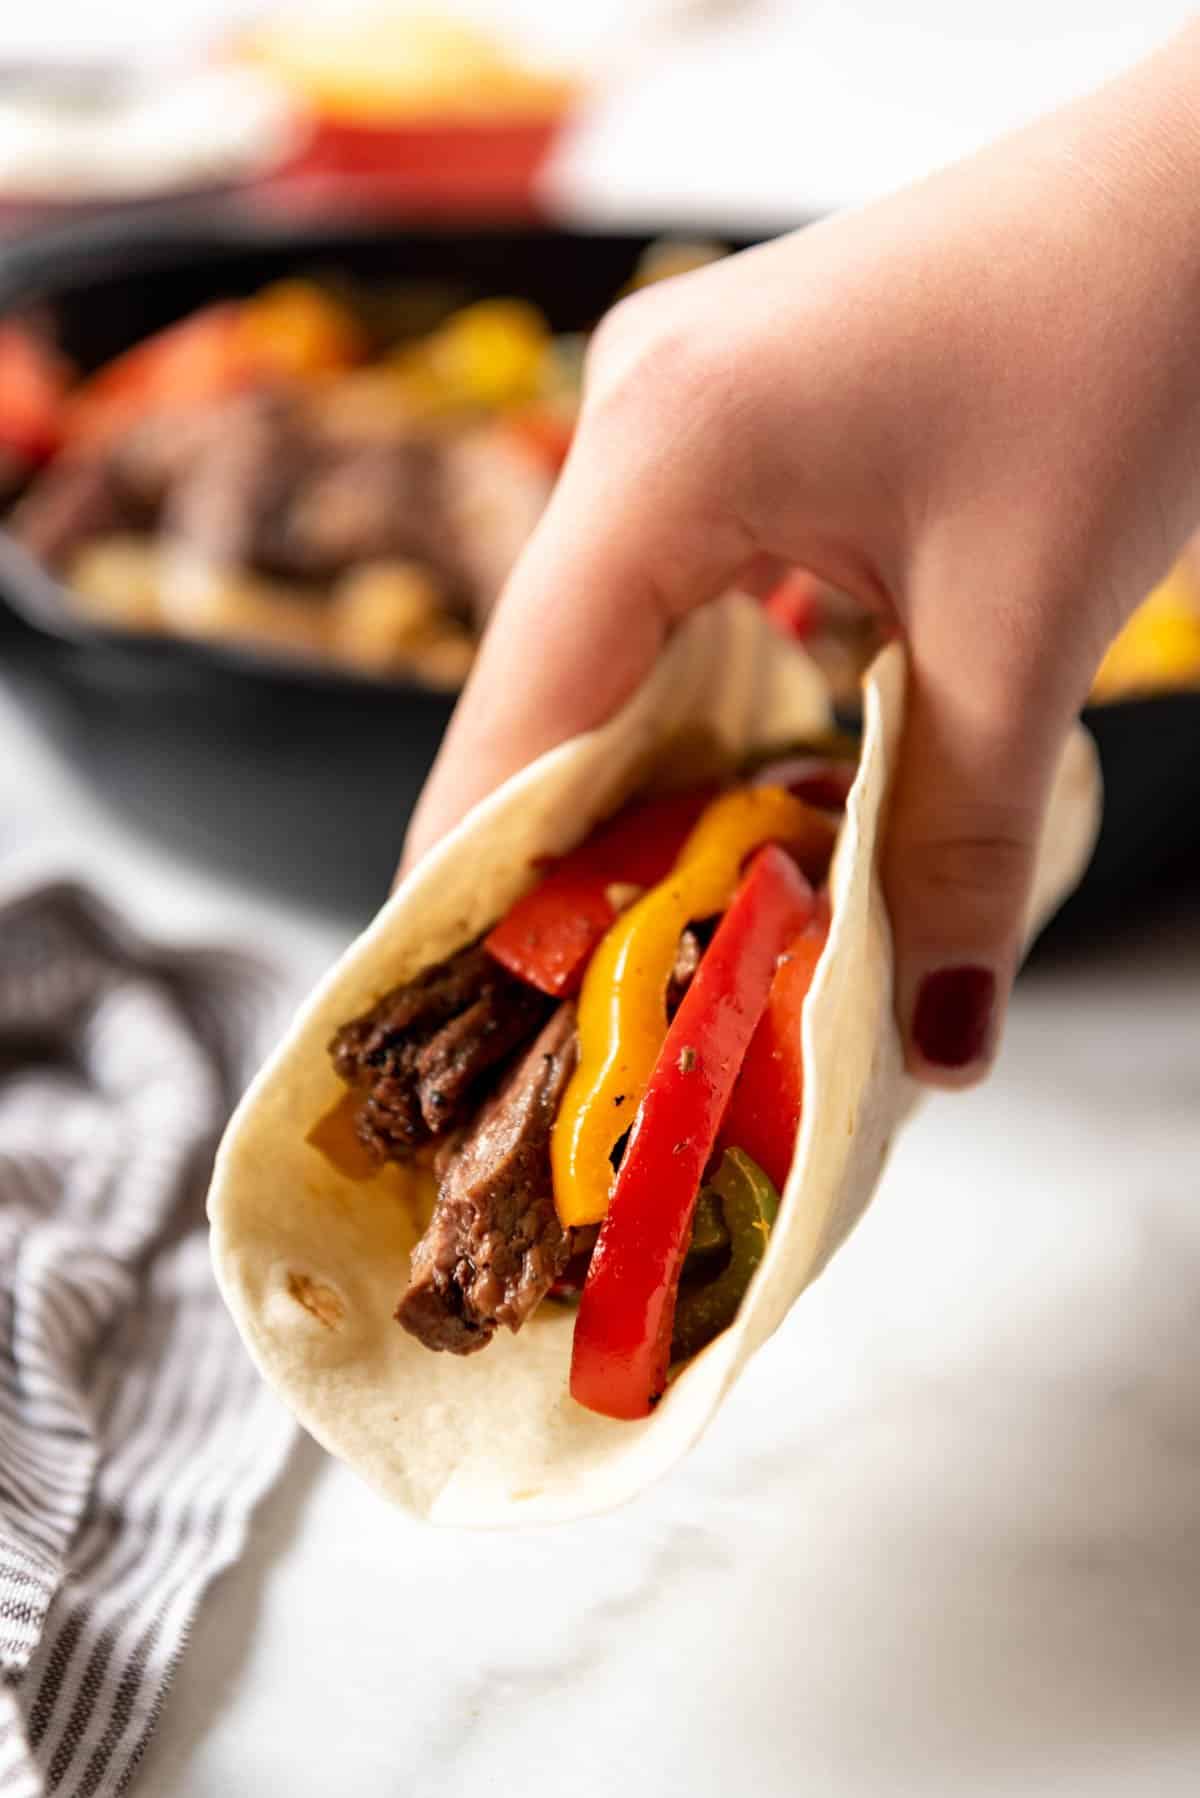 A hand lifting up a steak fajita with red and yellow peppers in a tortilla.